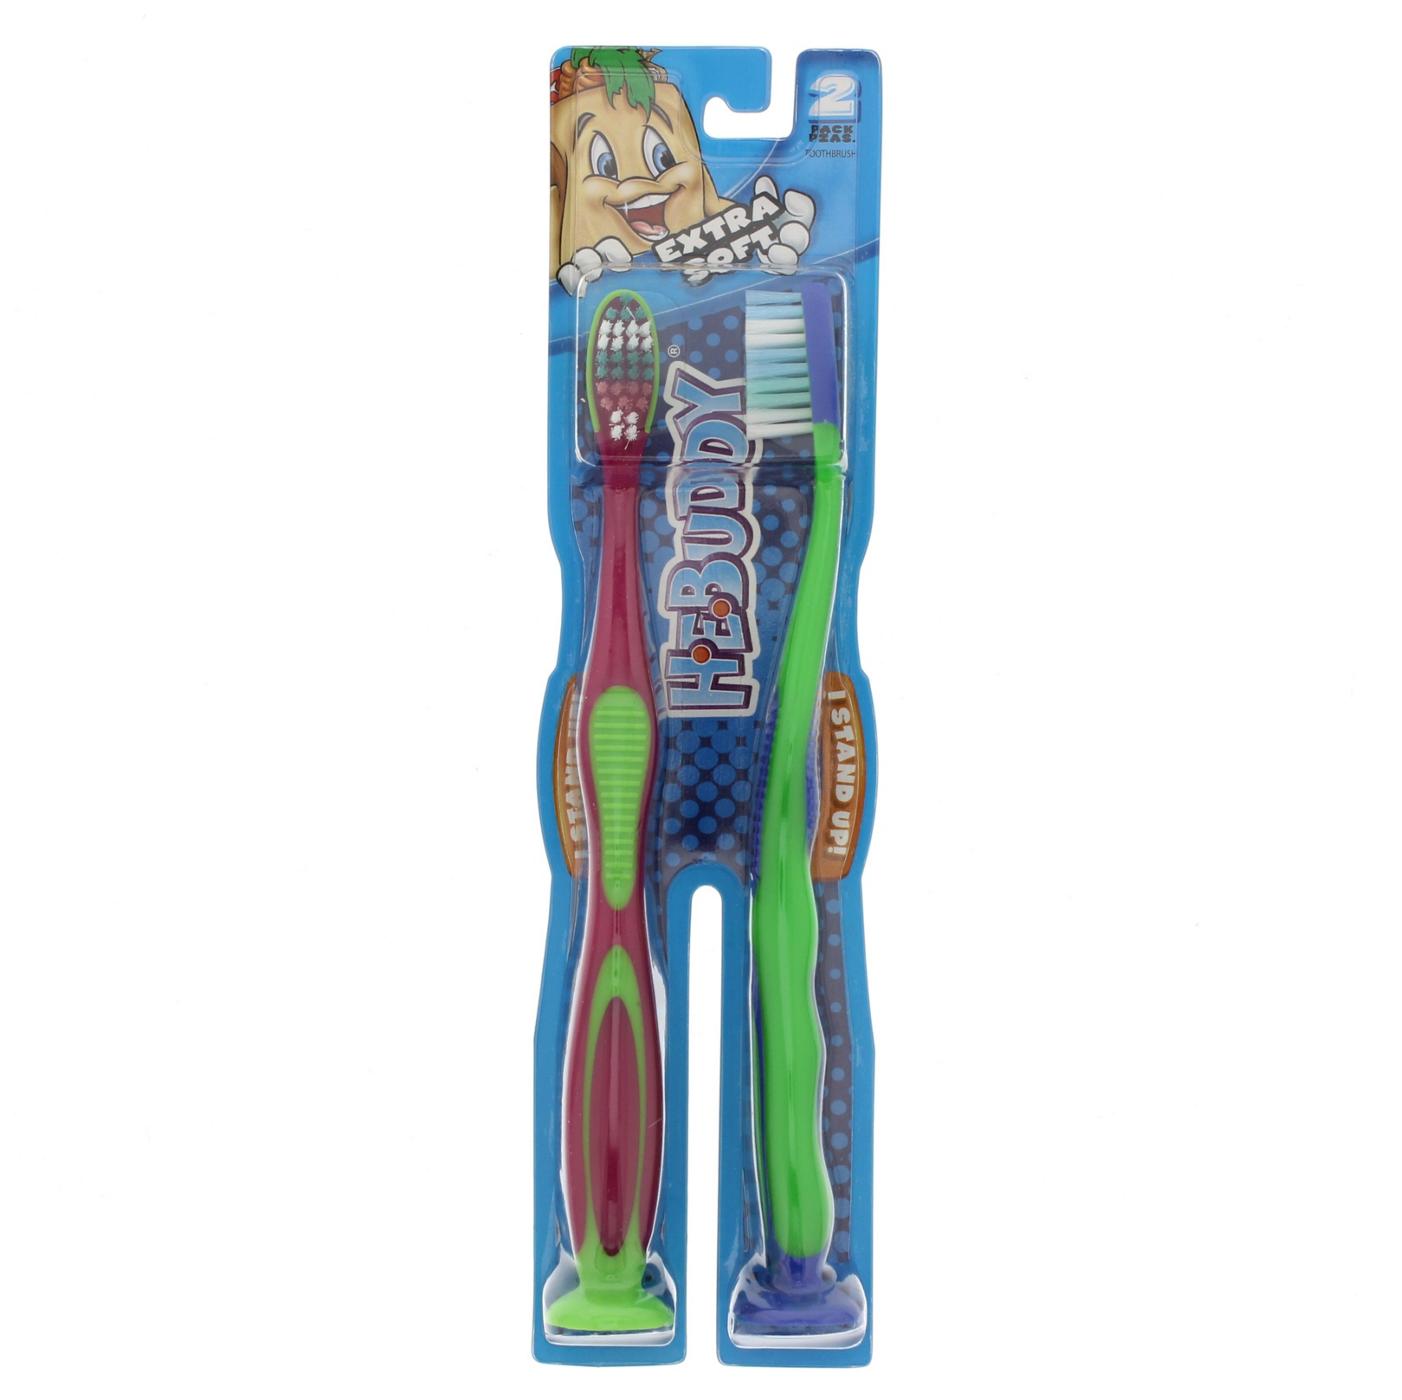 H-E-Buddy Kids Extra Soft Stand Up Toothbrushes - Colors May Vary; image 4 of 4